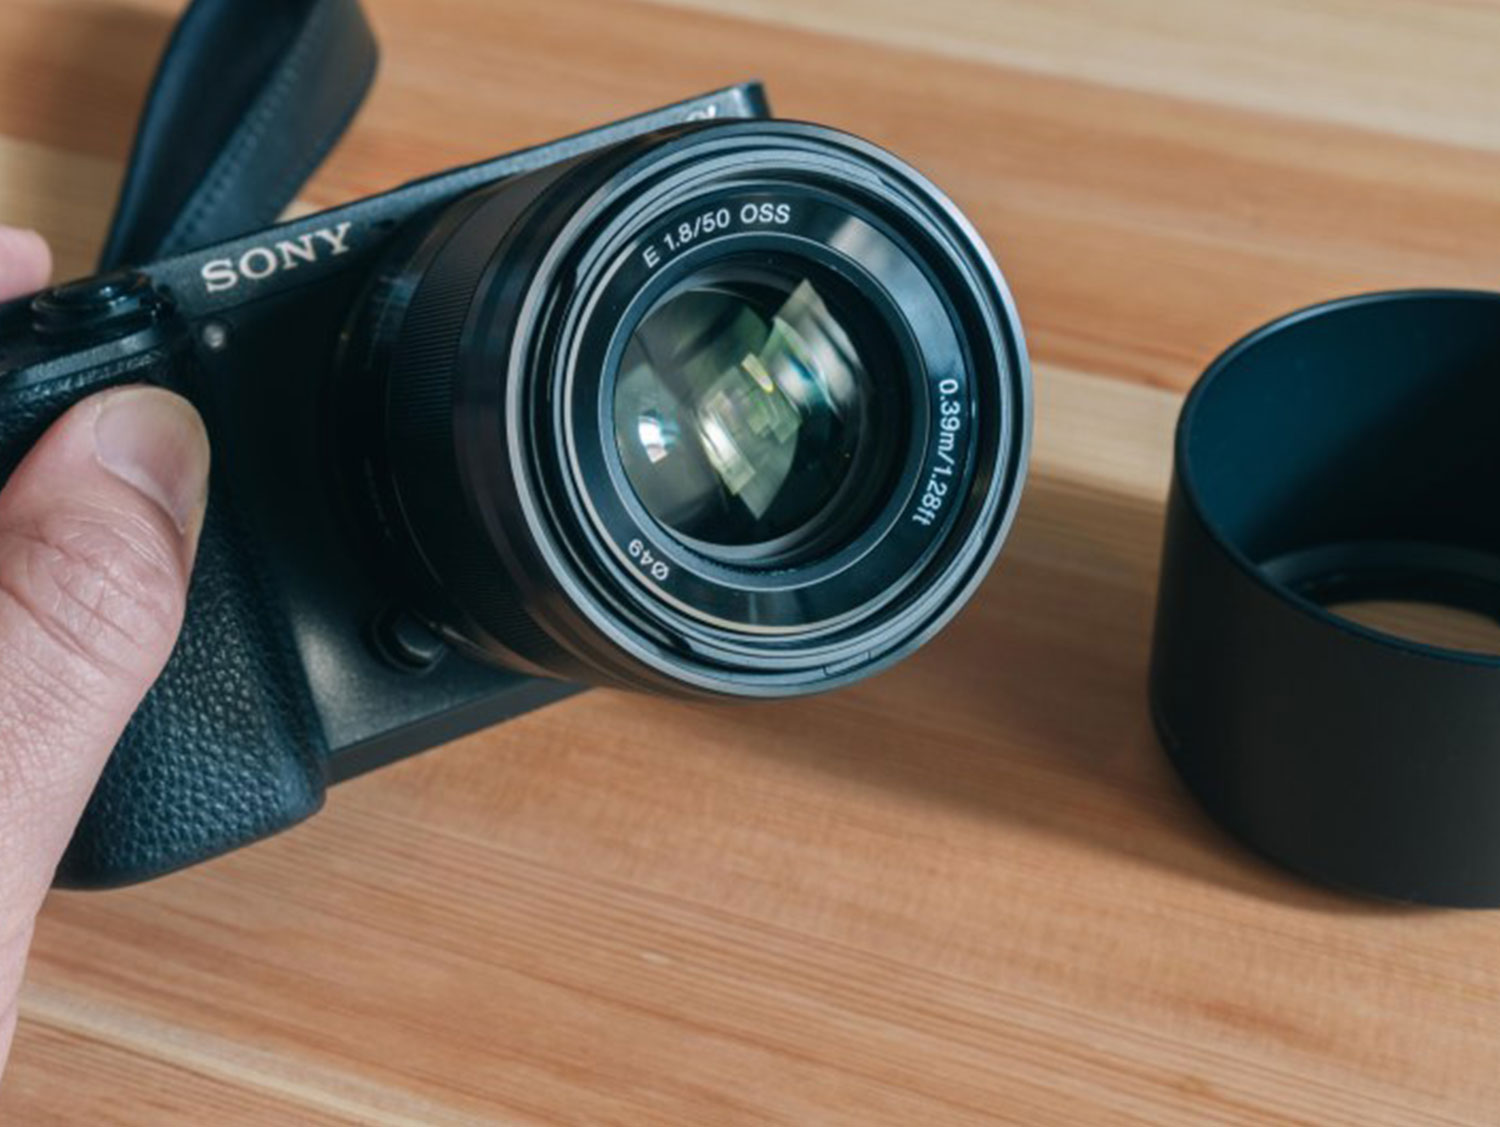 Sony E 50mm F1.8 Lens - Front View